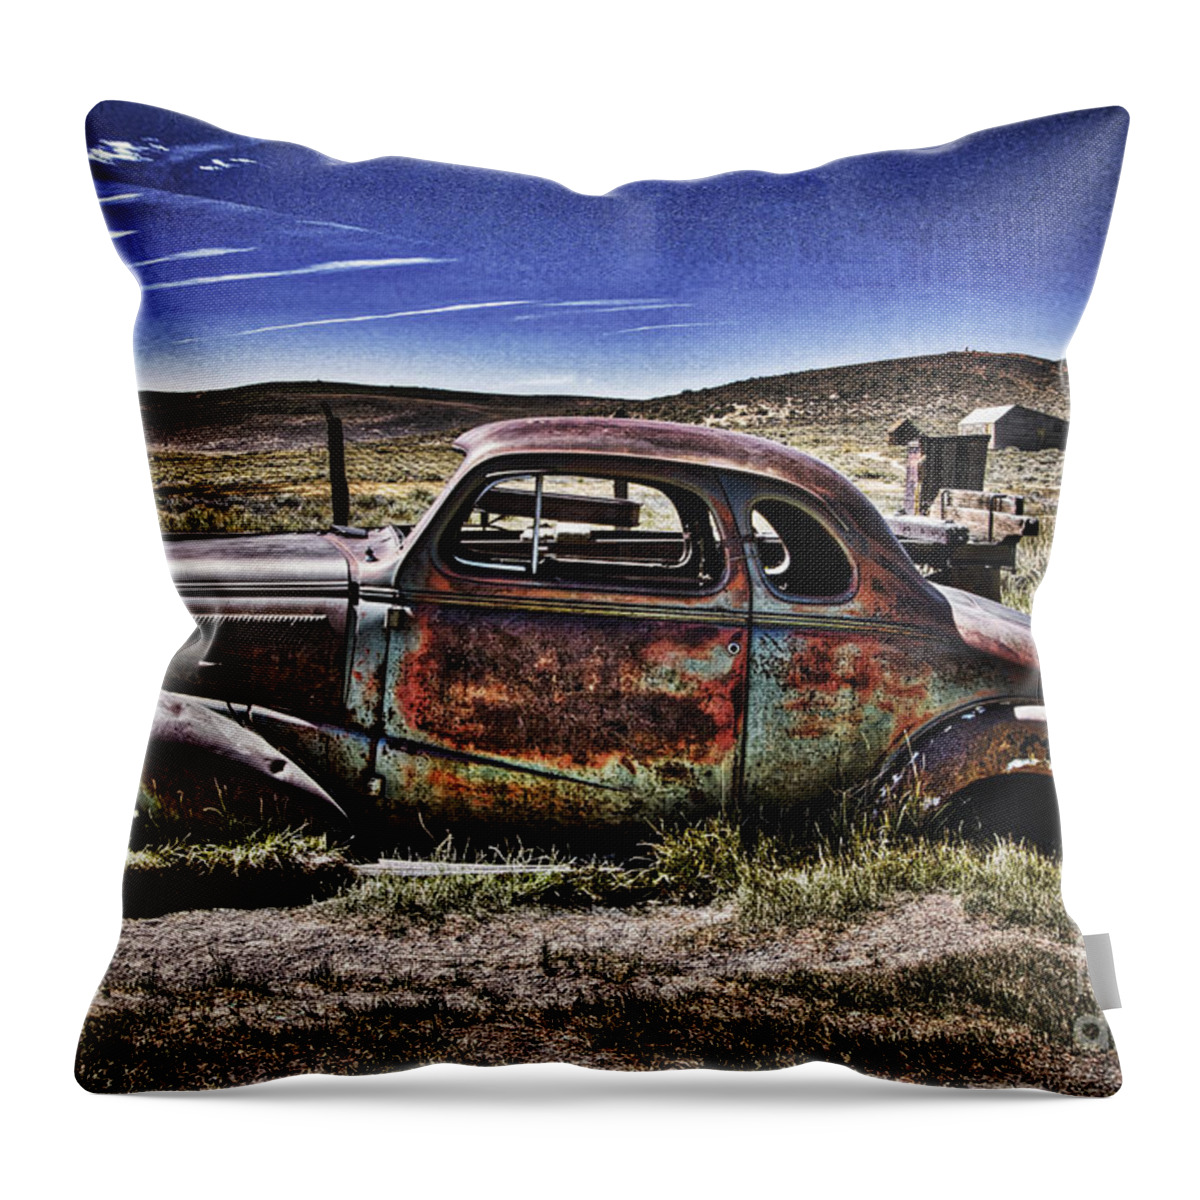 Bodie California Throw Pillow featuring the photograph Once Upon A Time by Mitch Shindelbower